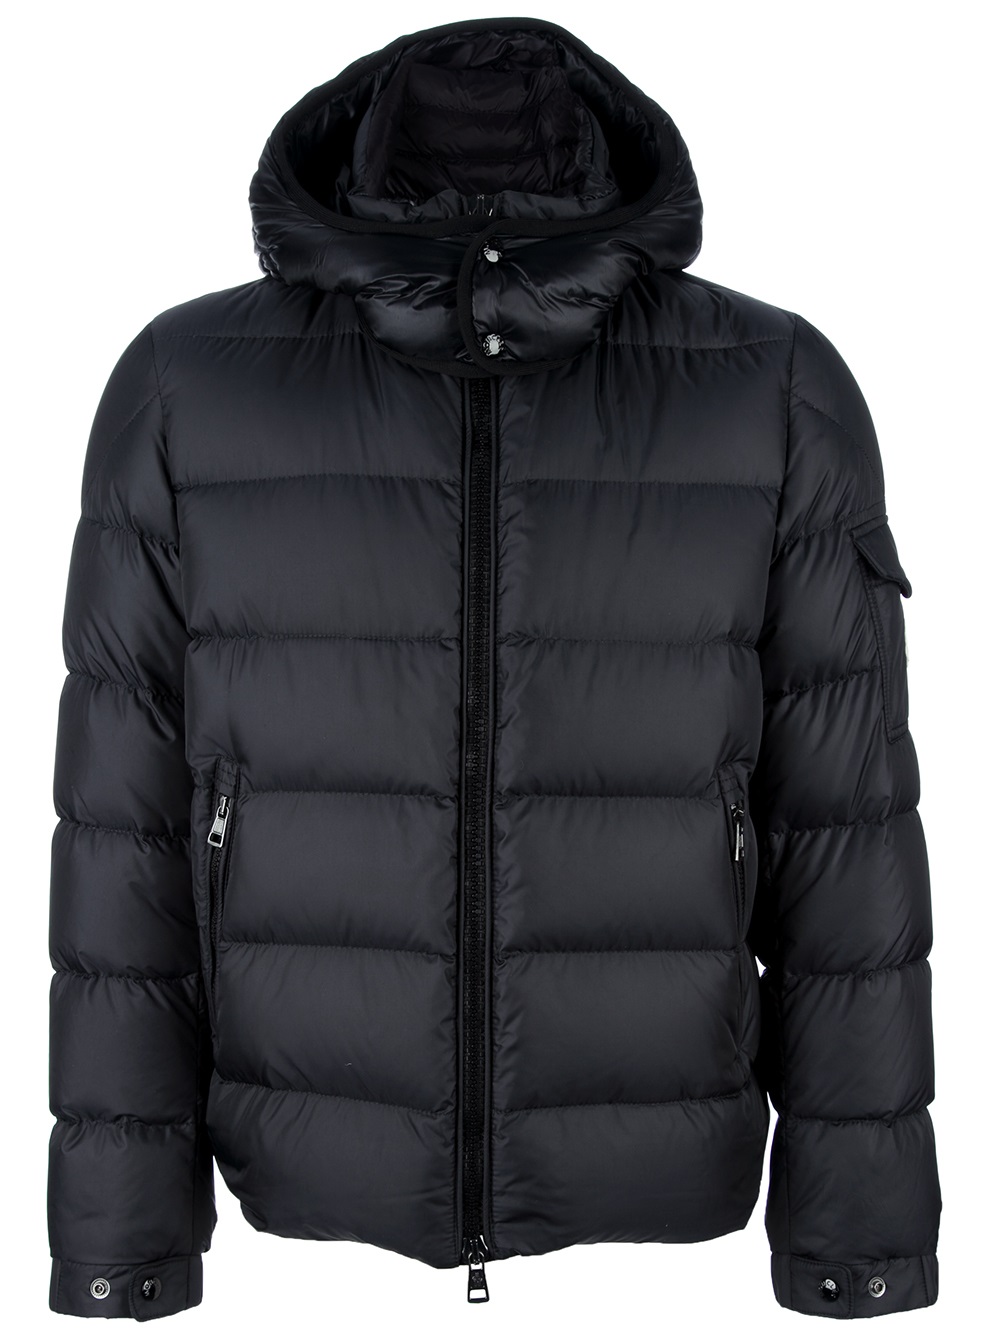 Lyst - Moncler 'hymalay' Jacket in Black for Men